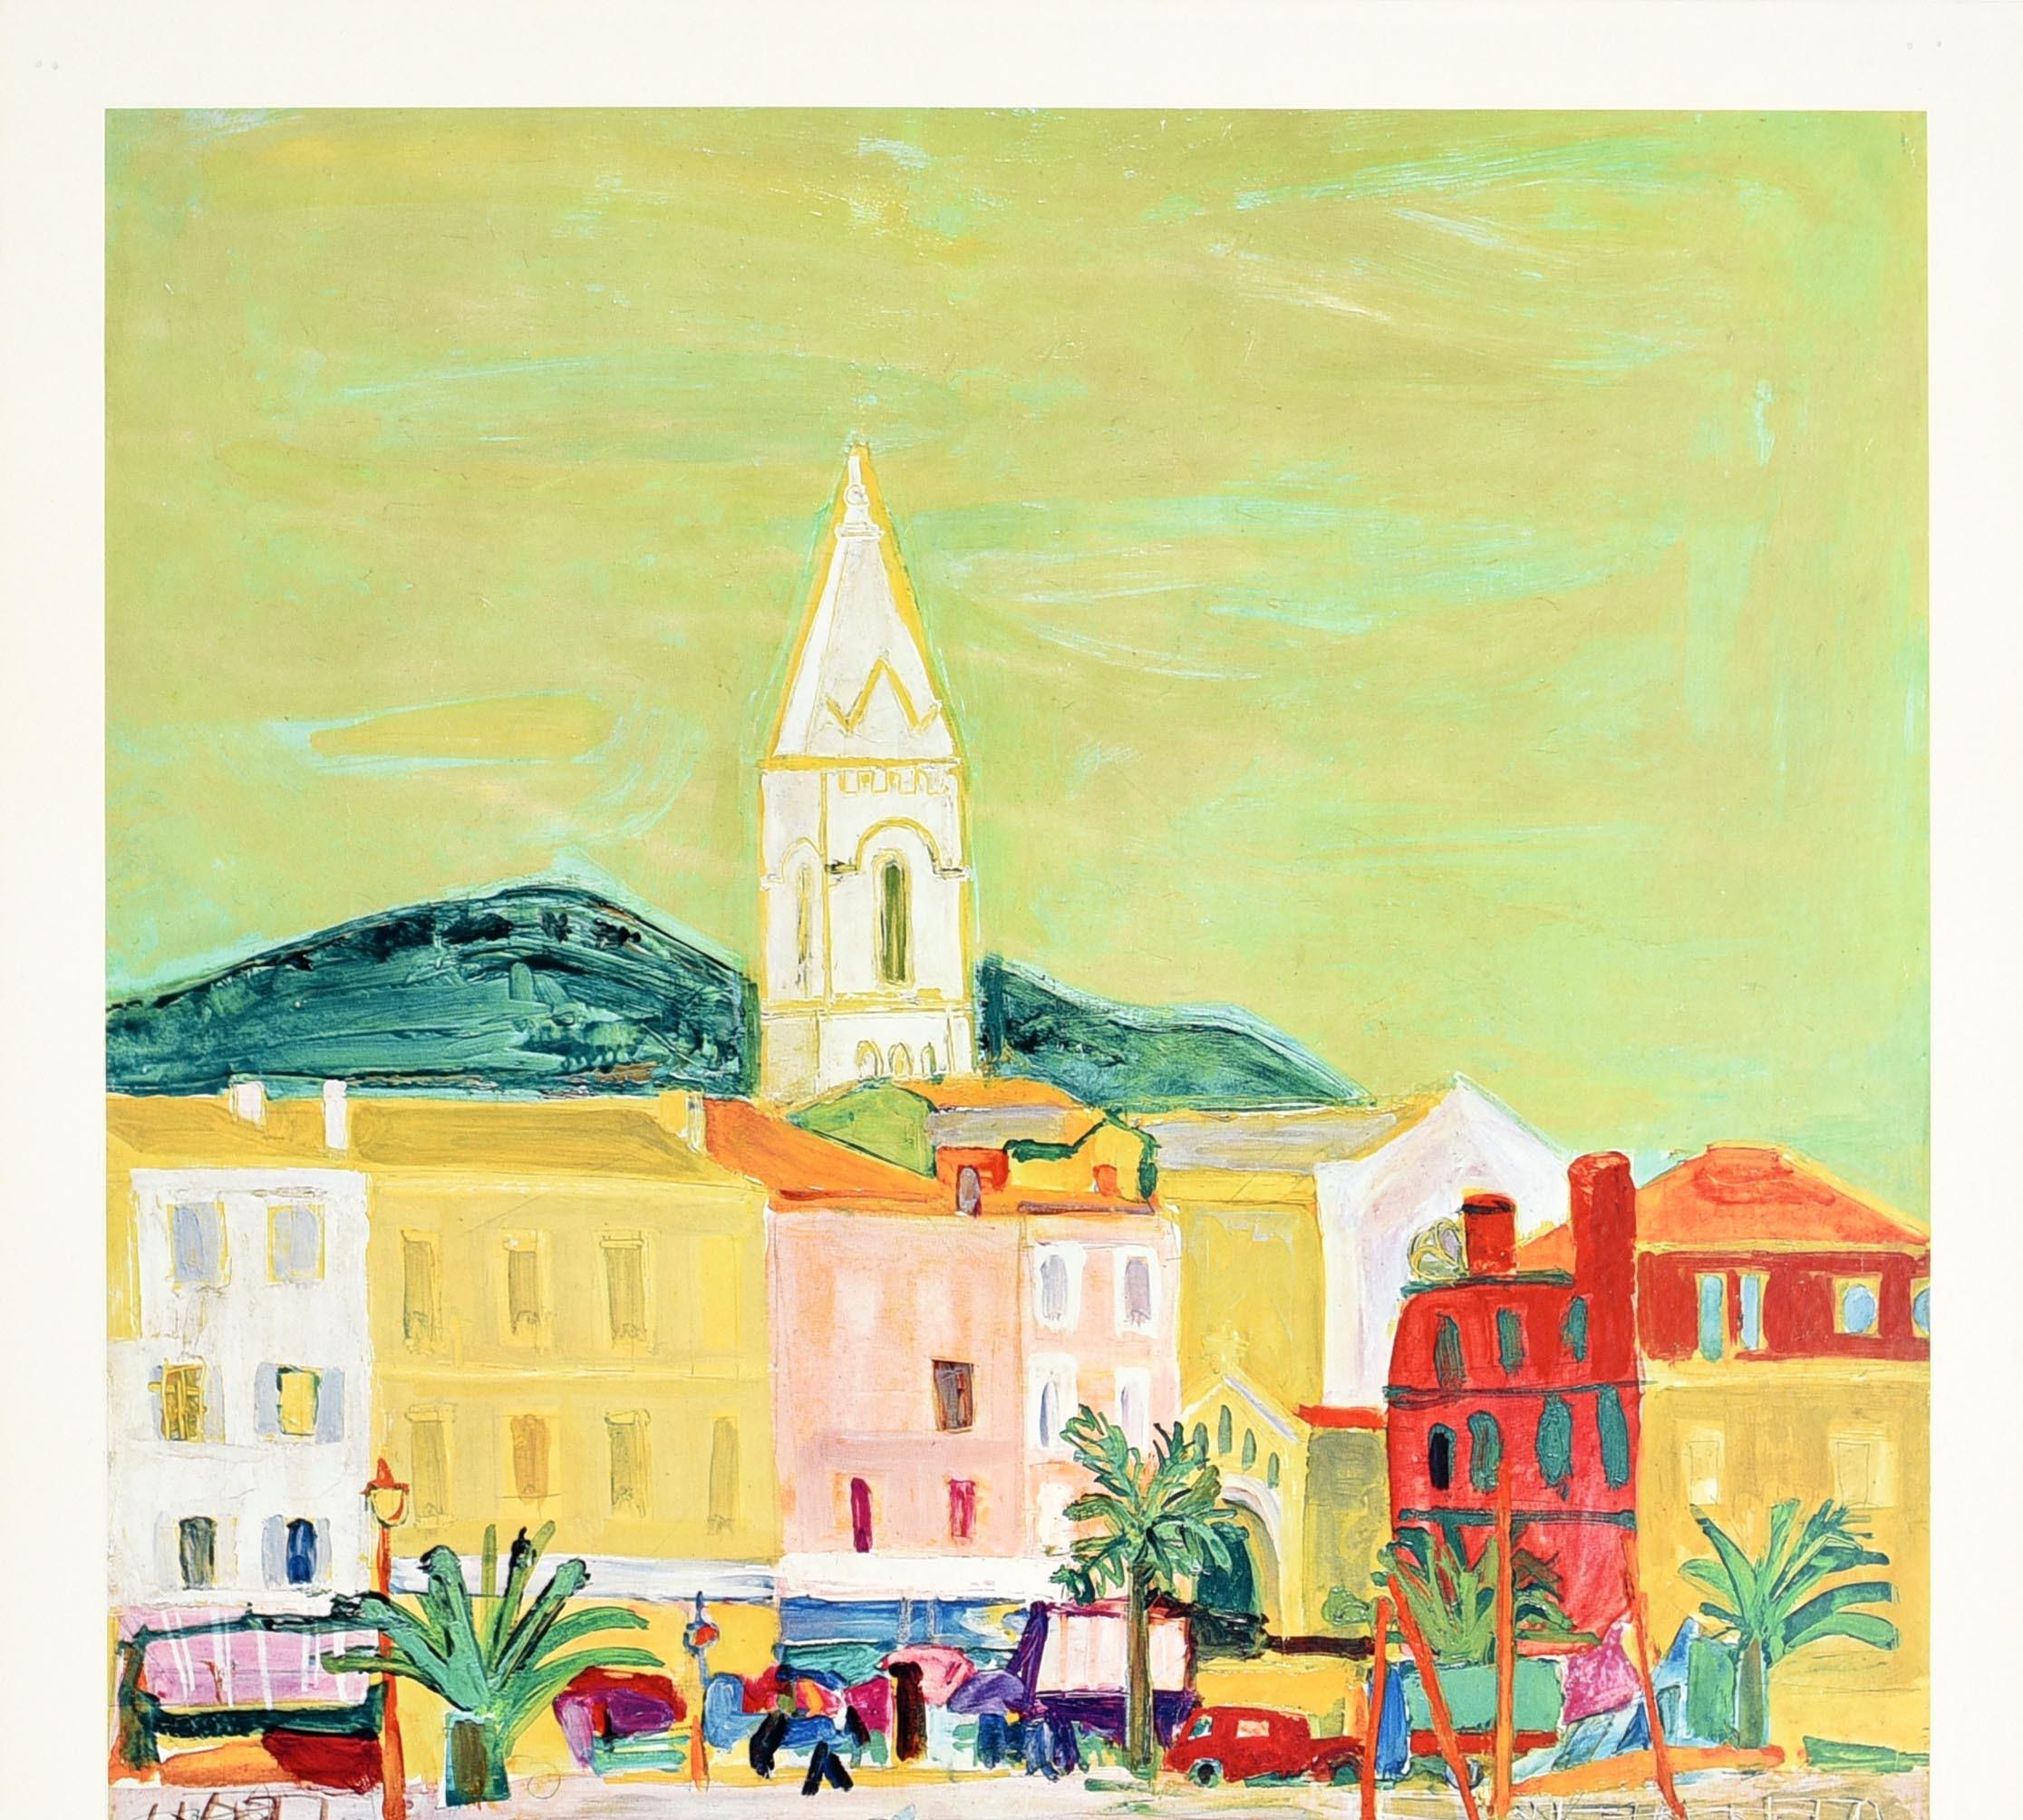 Original vintage travel poster for the Cote D'Azur by Roger Bezombes (1913-1994): Discover France by Train French National Railroads featuring a colourful view of the French Riviera showing a palm tree lined embankment with boats in a marina, a